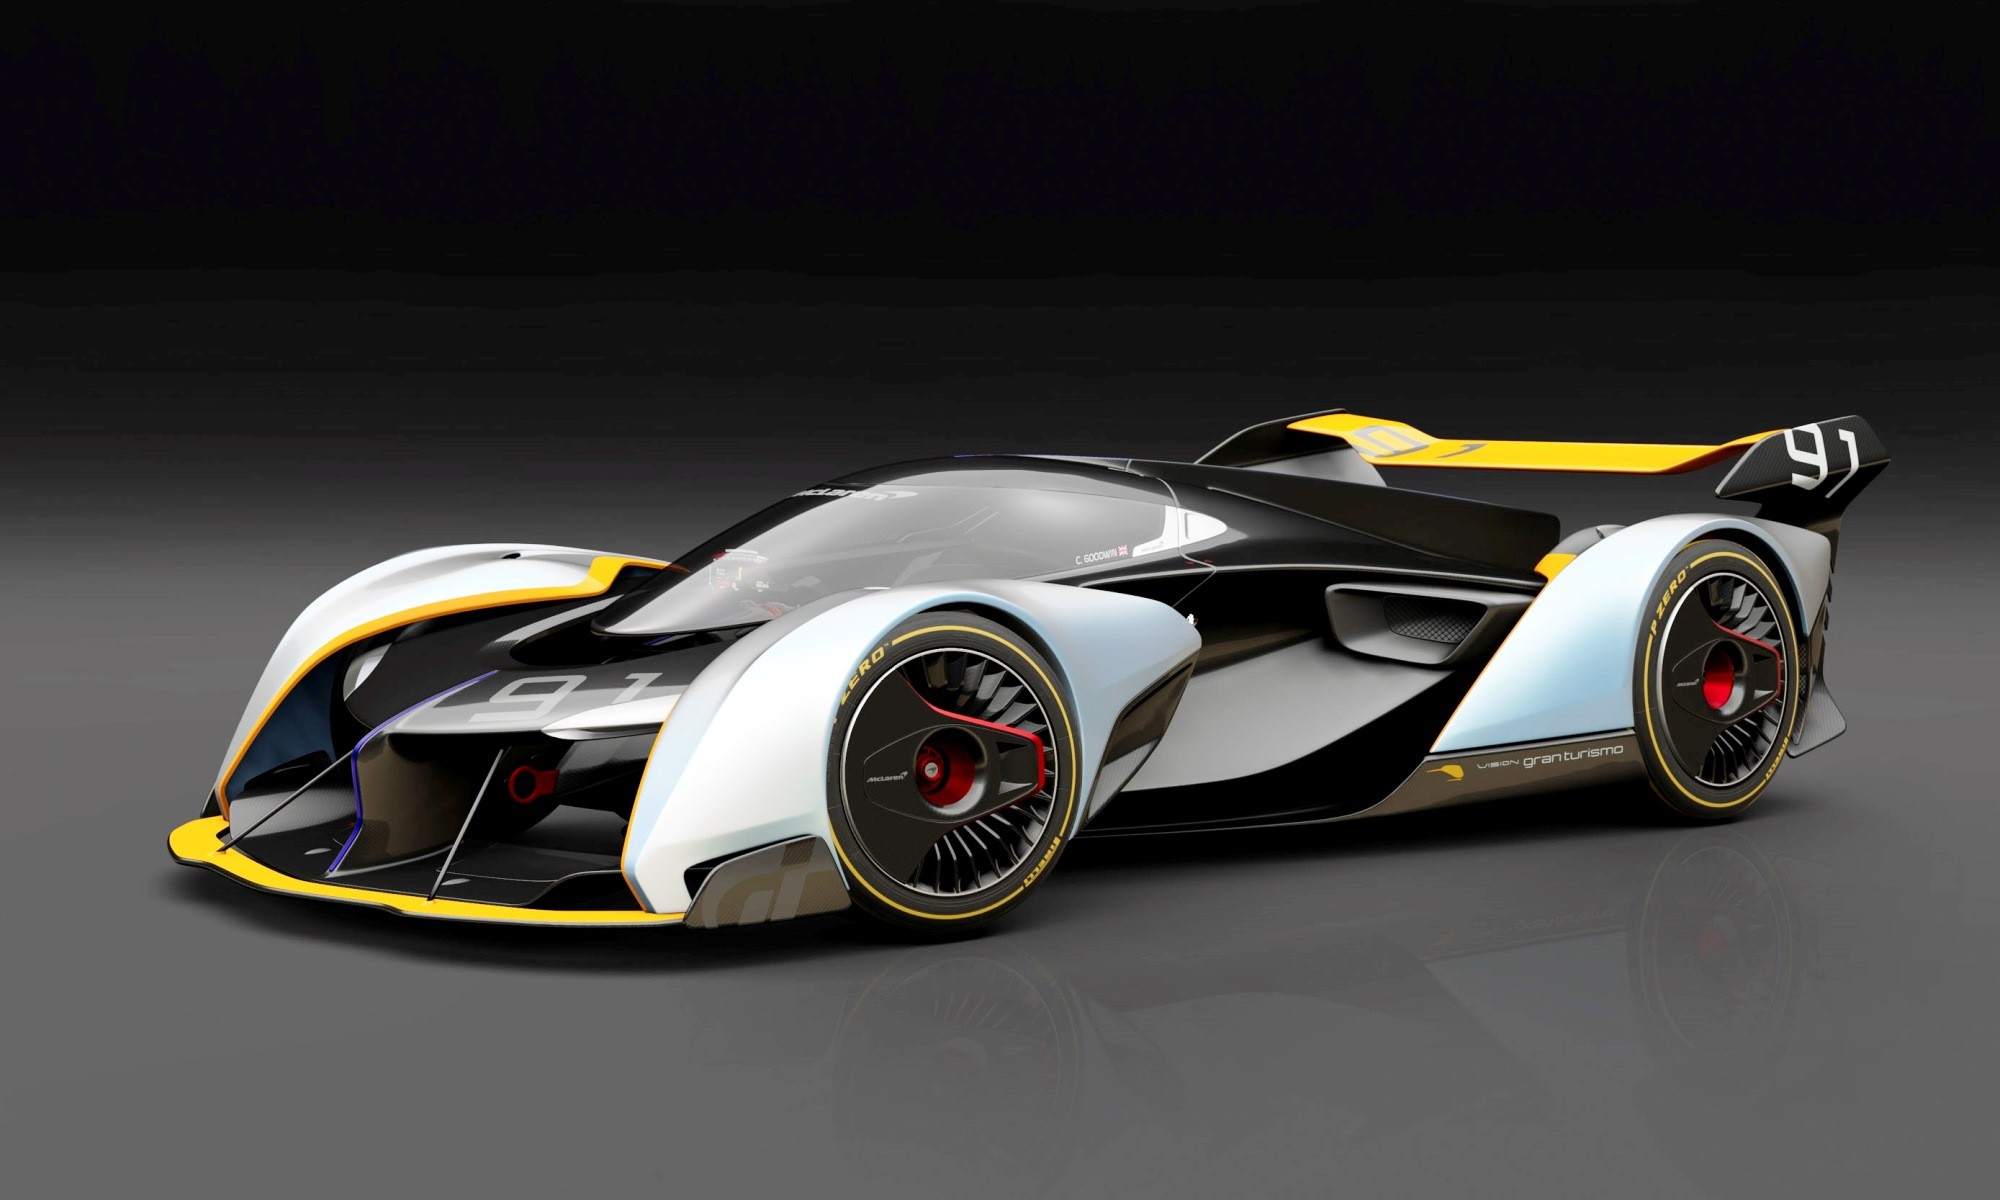 Vision GT concept is the inspiration for McLaren BC-03